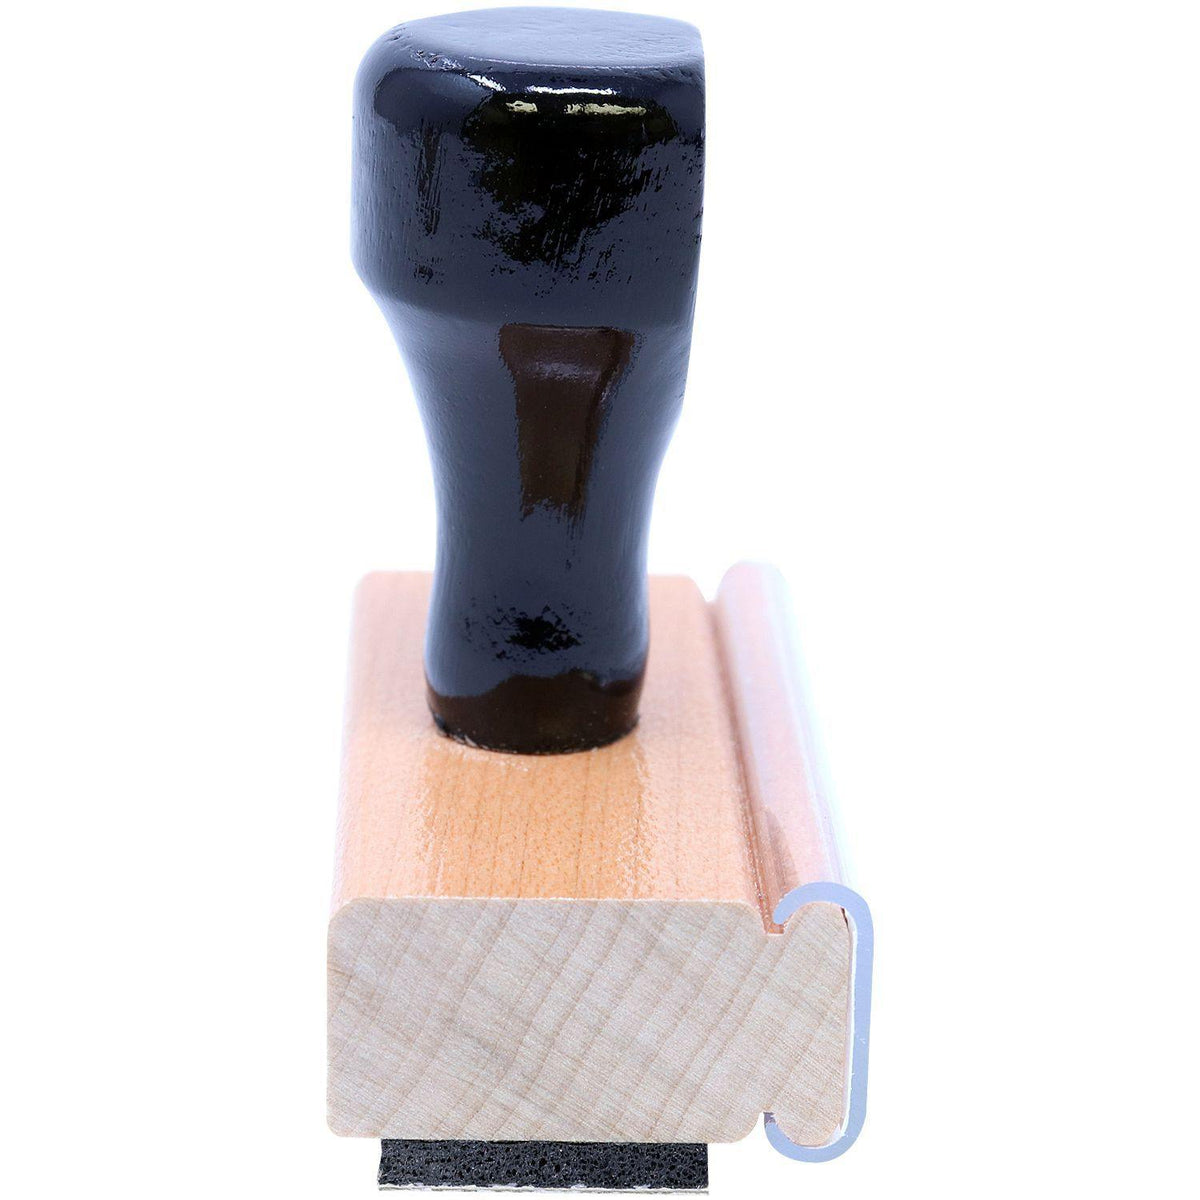 Large Two Thumbs Up with Thumb Icon Rubber Stamp - Engineer Seal Stamps - Brand_Acorn, Impression Size_Large, Stamp Type_Regular Stamp, Type of Use_Teacher